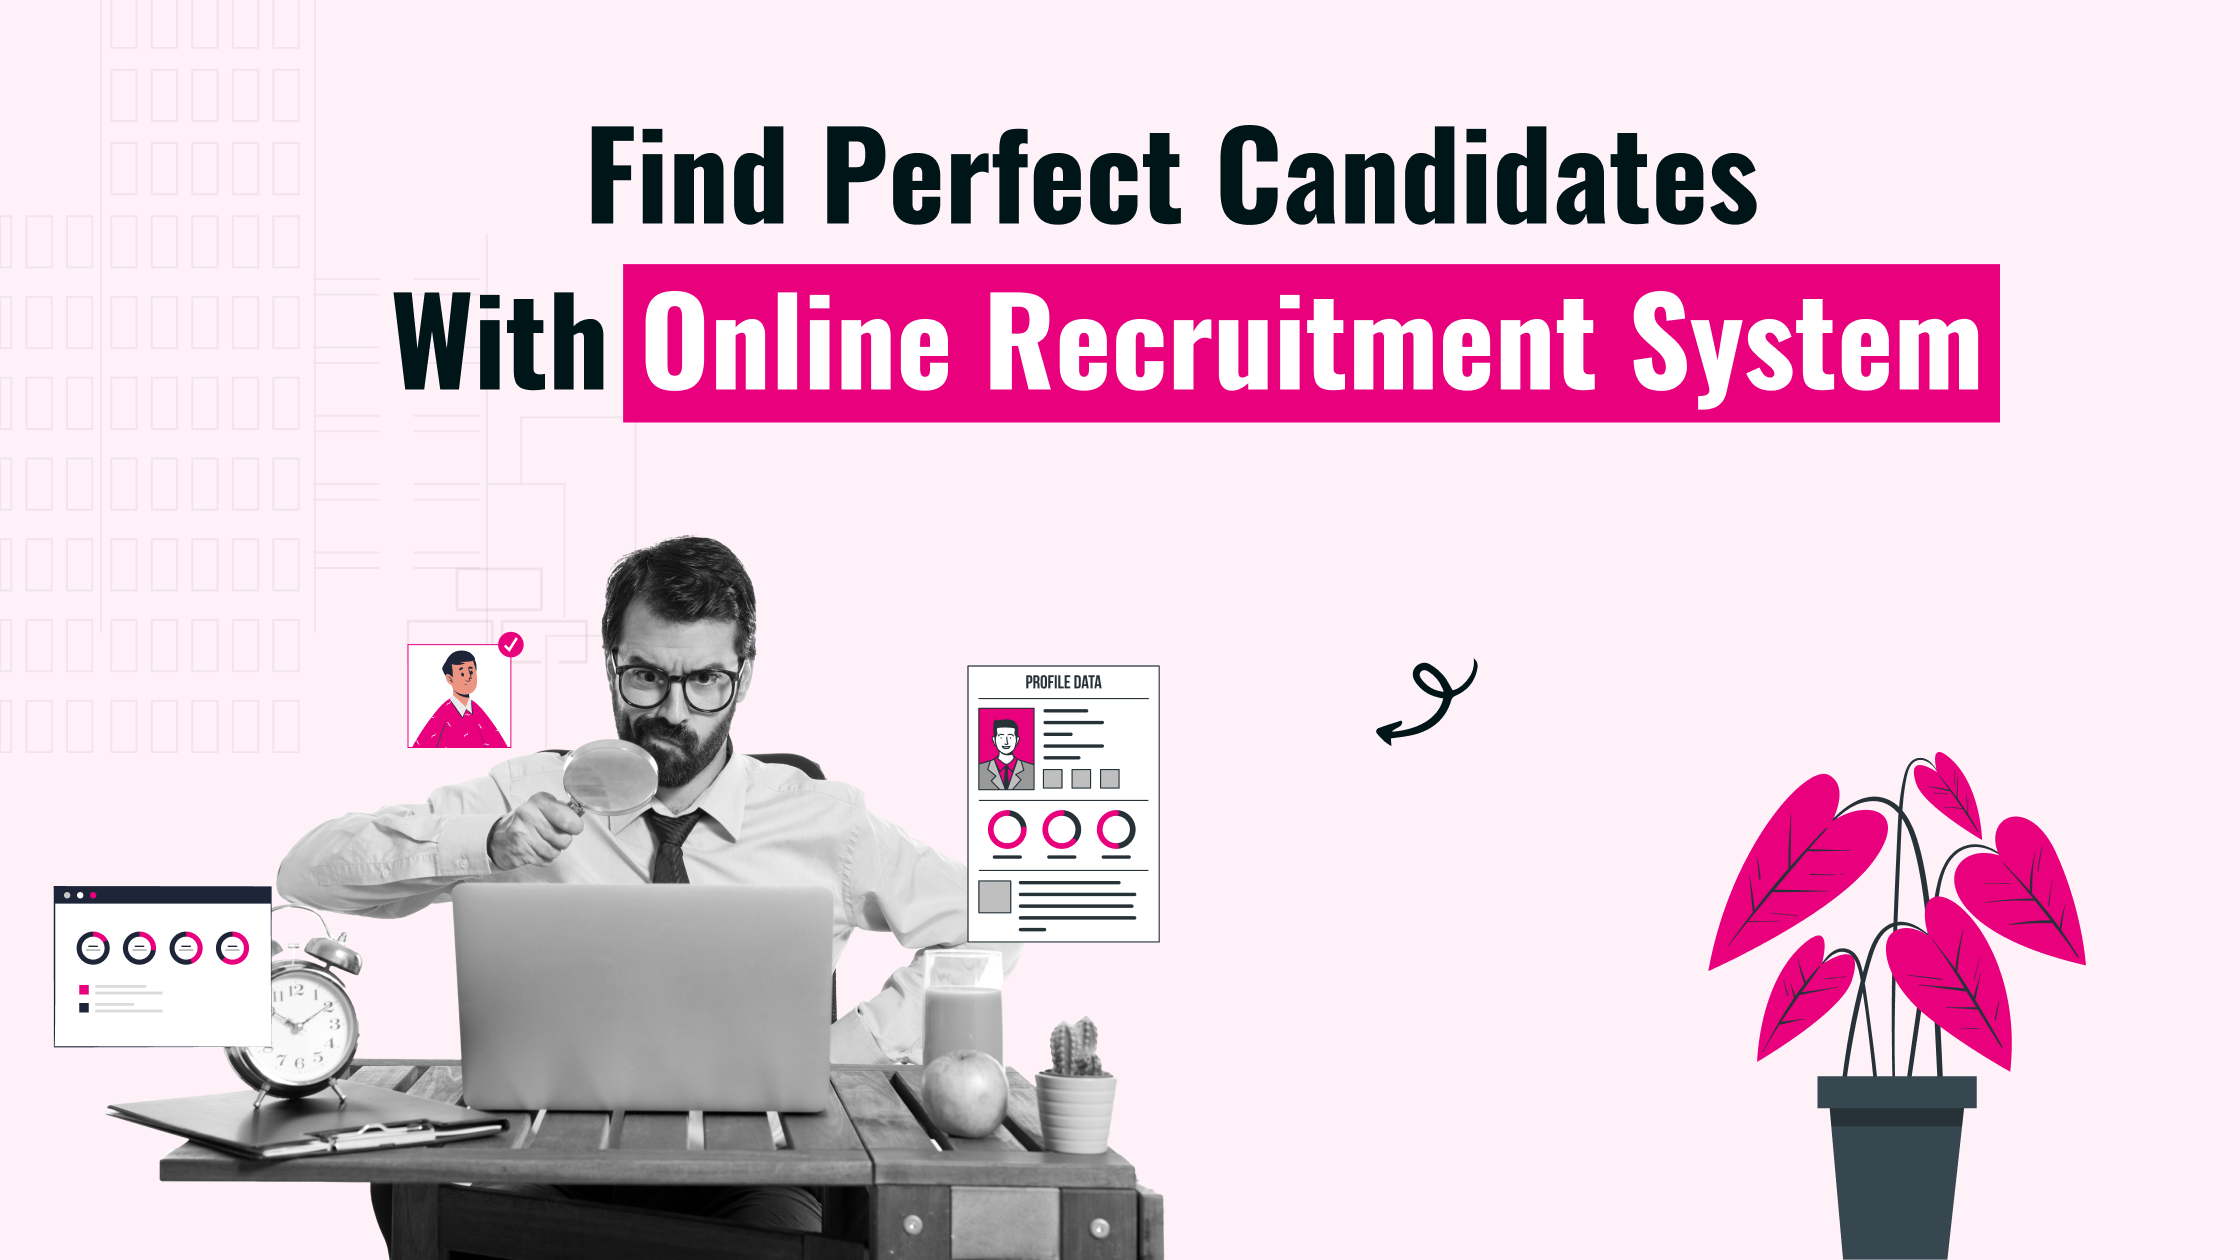 Find Perfect Candidates With Online Recruitment System